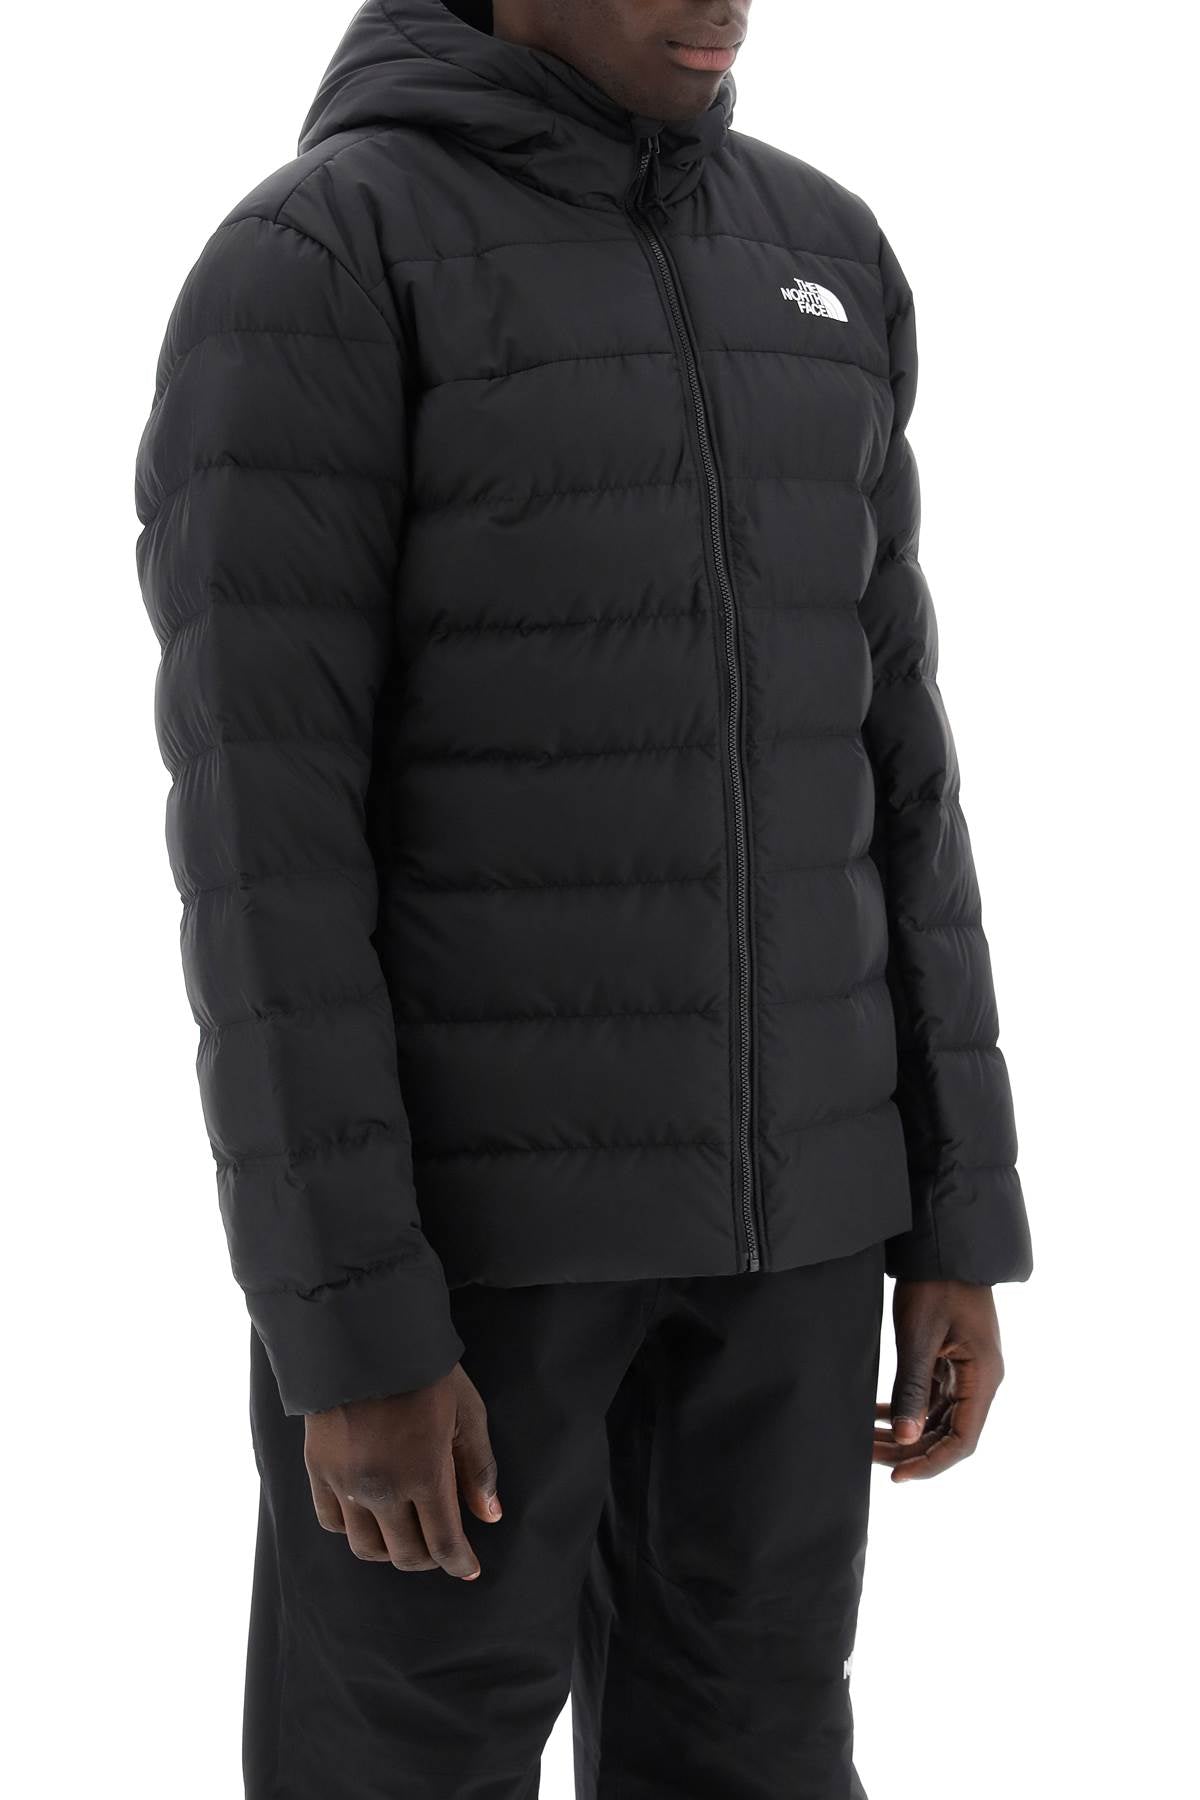 The north face aconcagua iii lightweight puffer jacket-1